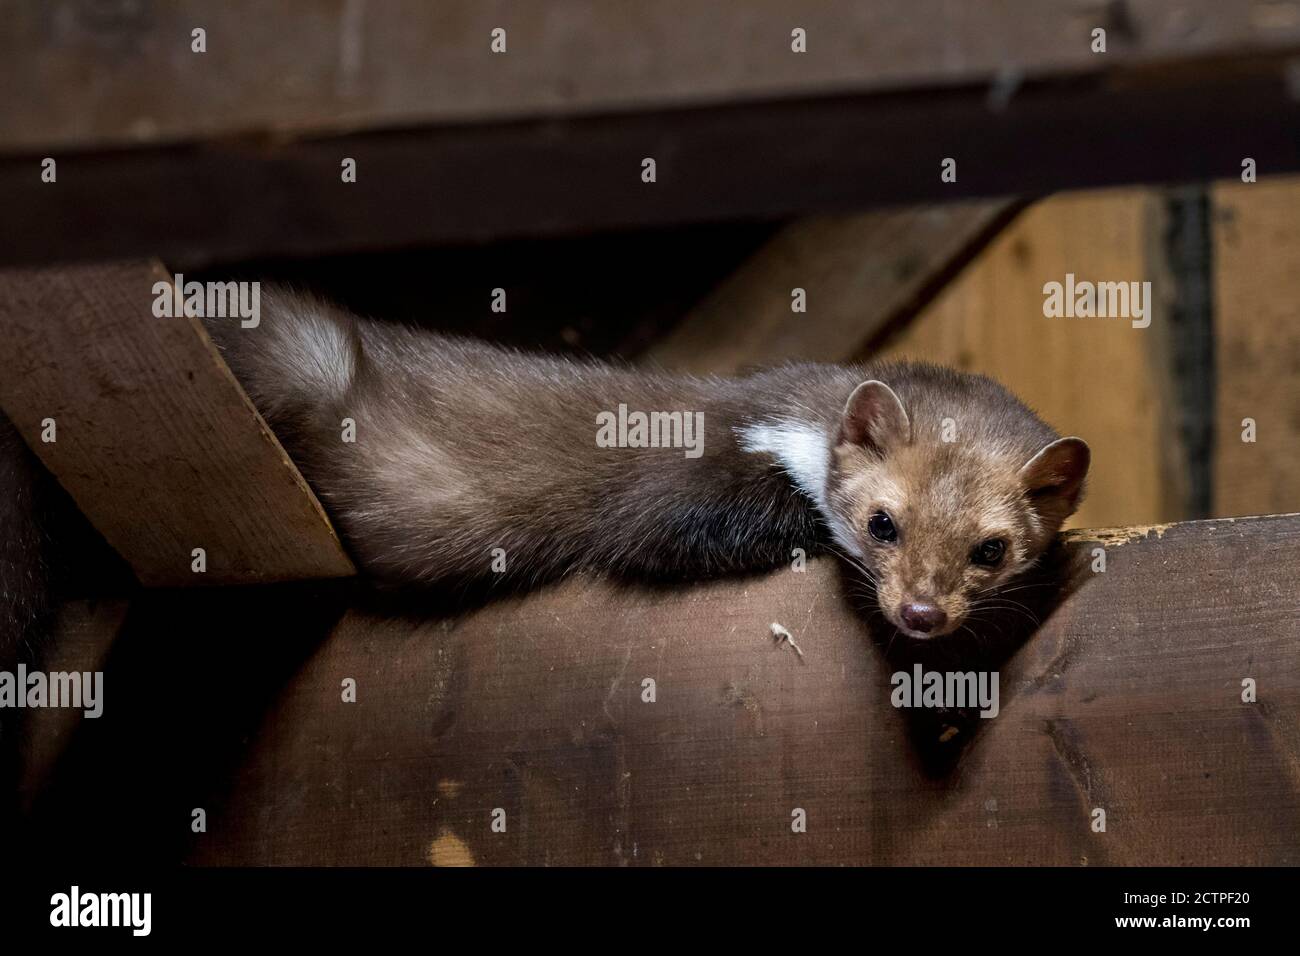 Beech marten / stone marten (Martes foina) looking down from beam in wooden roof truss of barn / shed / house Stock Photo